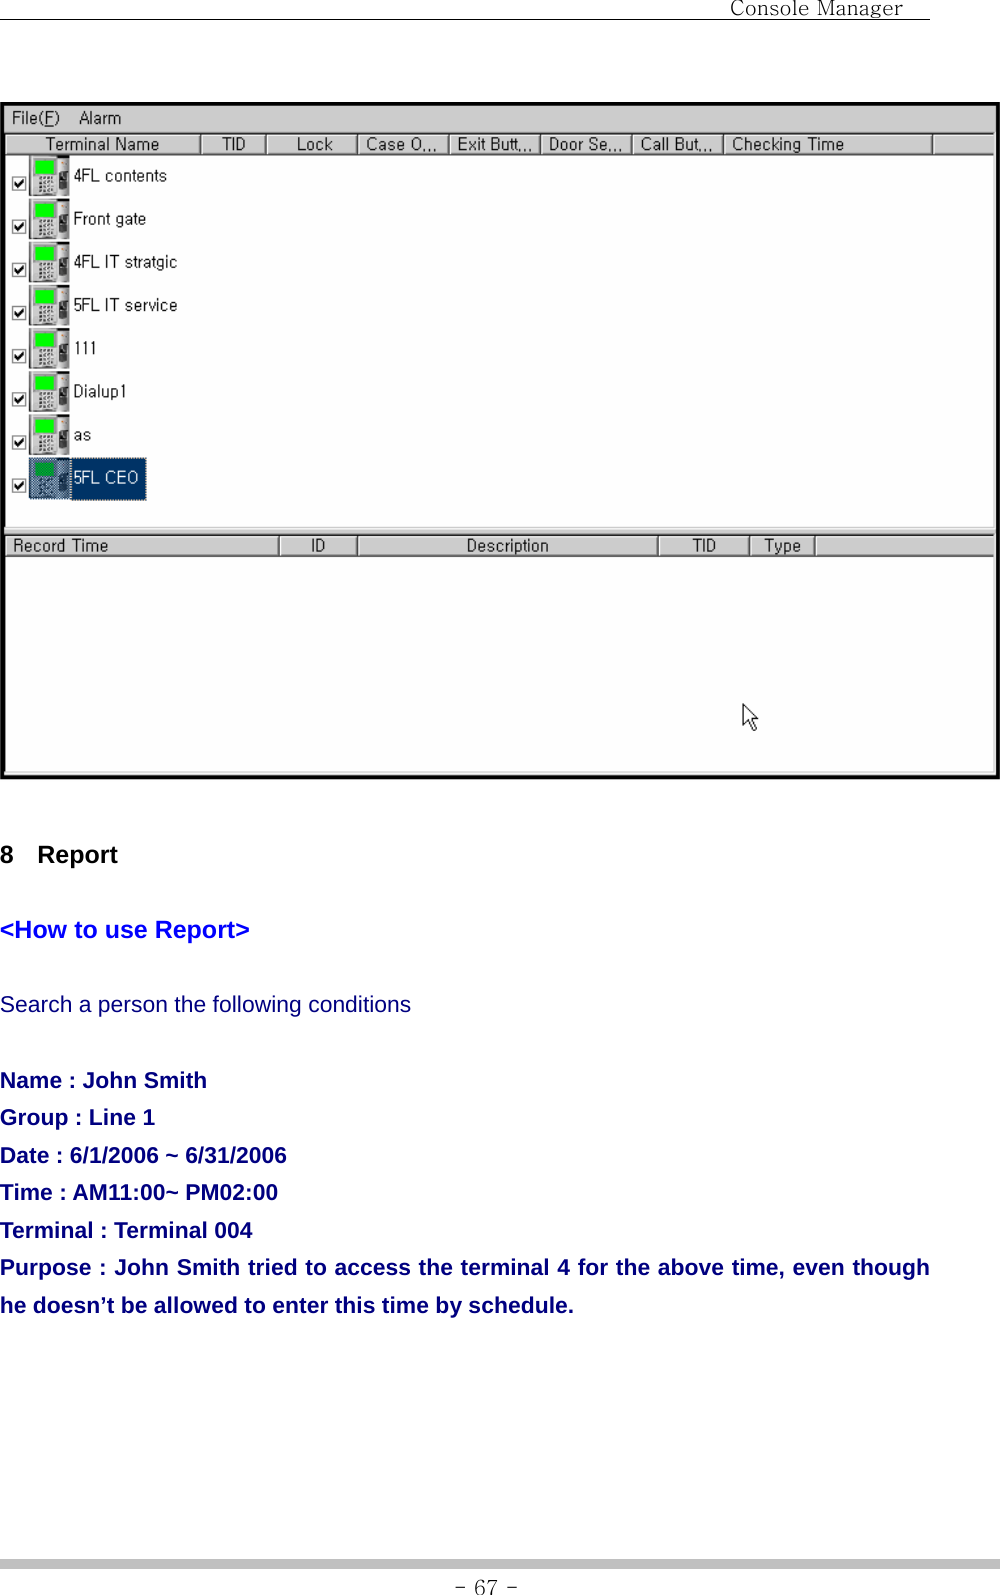                                Console Manager               - 67 -  8 Report  &lt;How to use Report&gt;  Search a person the following conditions  Name : John Smith Group : Line 1 Date : 6/1/2006 ~ 6/31/2006 Time : AM11:00~ PM02:00 Terminal : Terminal 004 Purpose : John Smith tried to access the terminal 4 for the above time, even though he doesn’t be allowed to enter this time by schedule.  